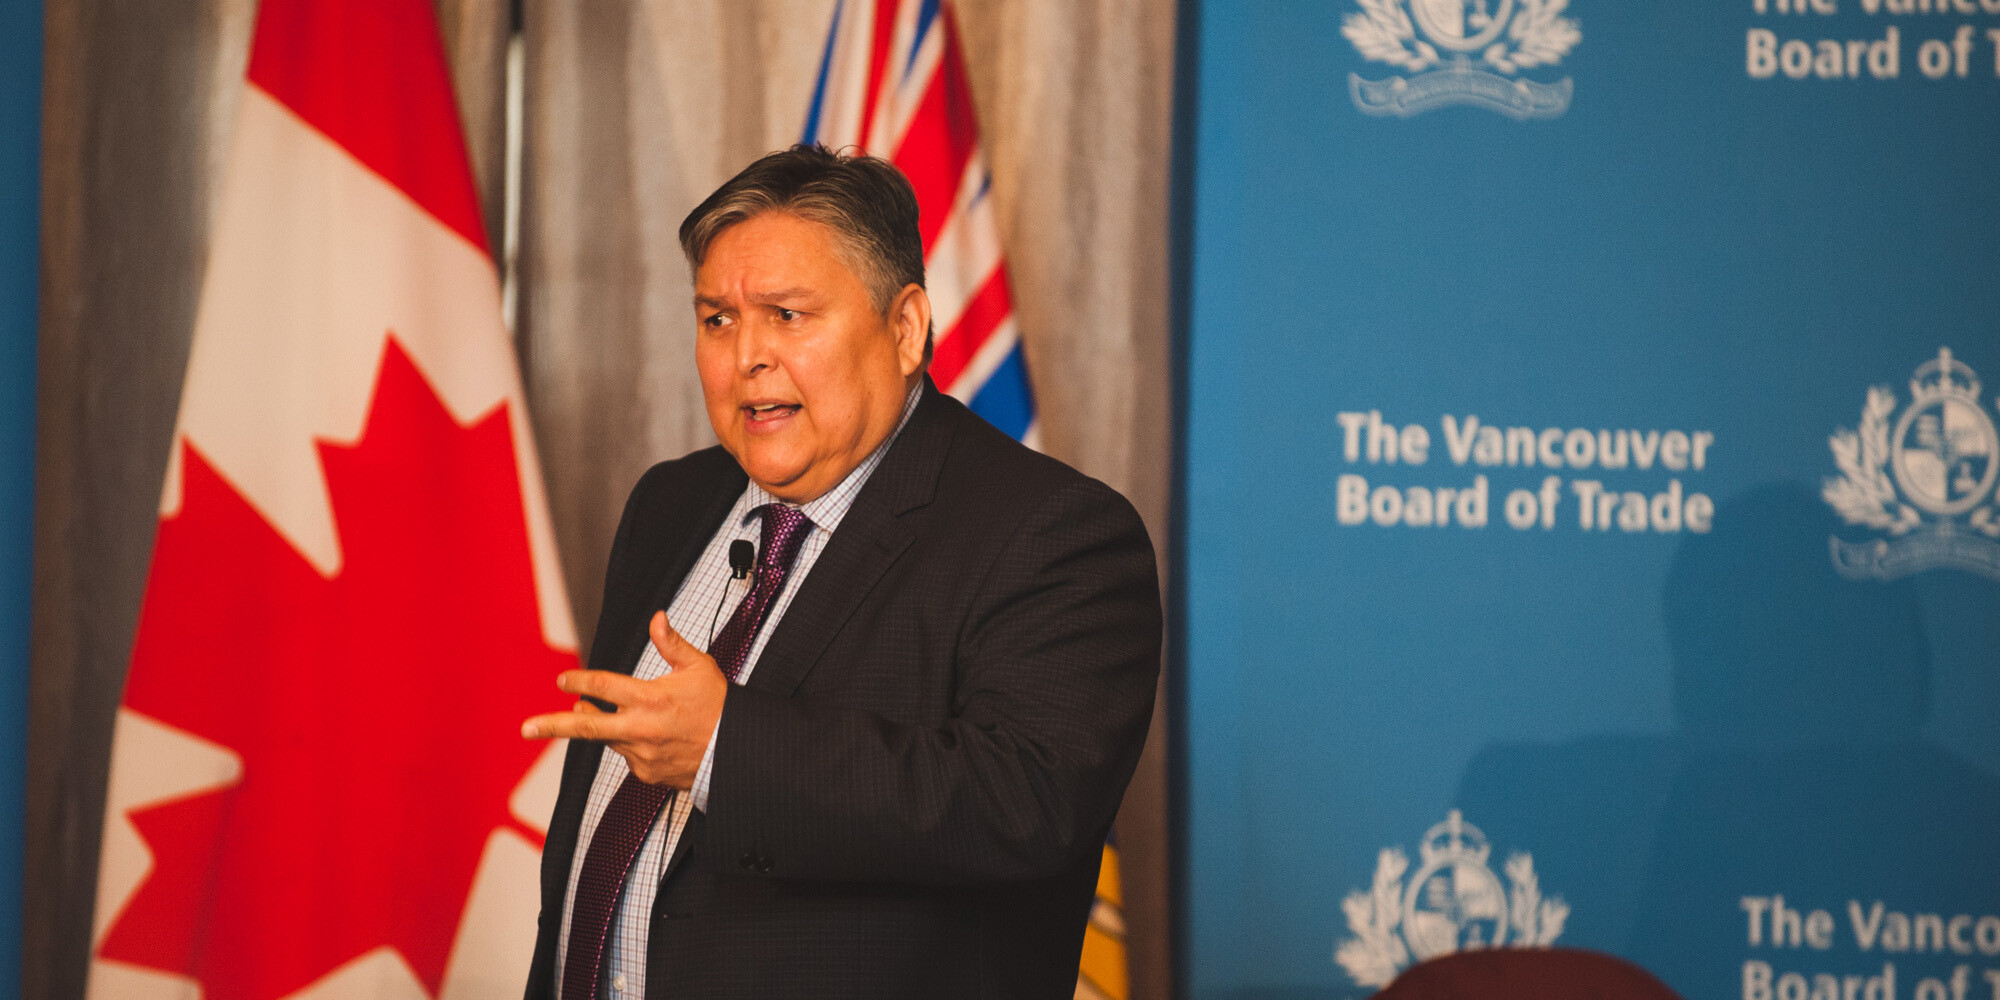 Featured photo: Bob Joseph at the Aboriginal Opportunities Forum 2014. Photo: Tyson Jerry, courtesy of the Vancouver Board of Trade.